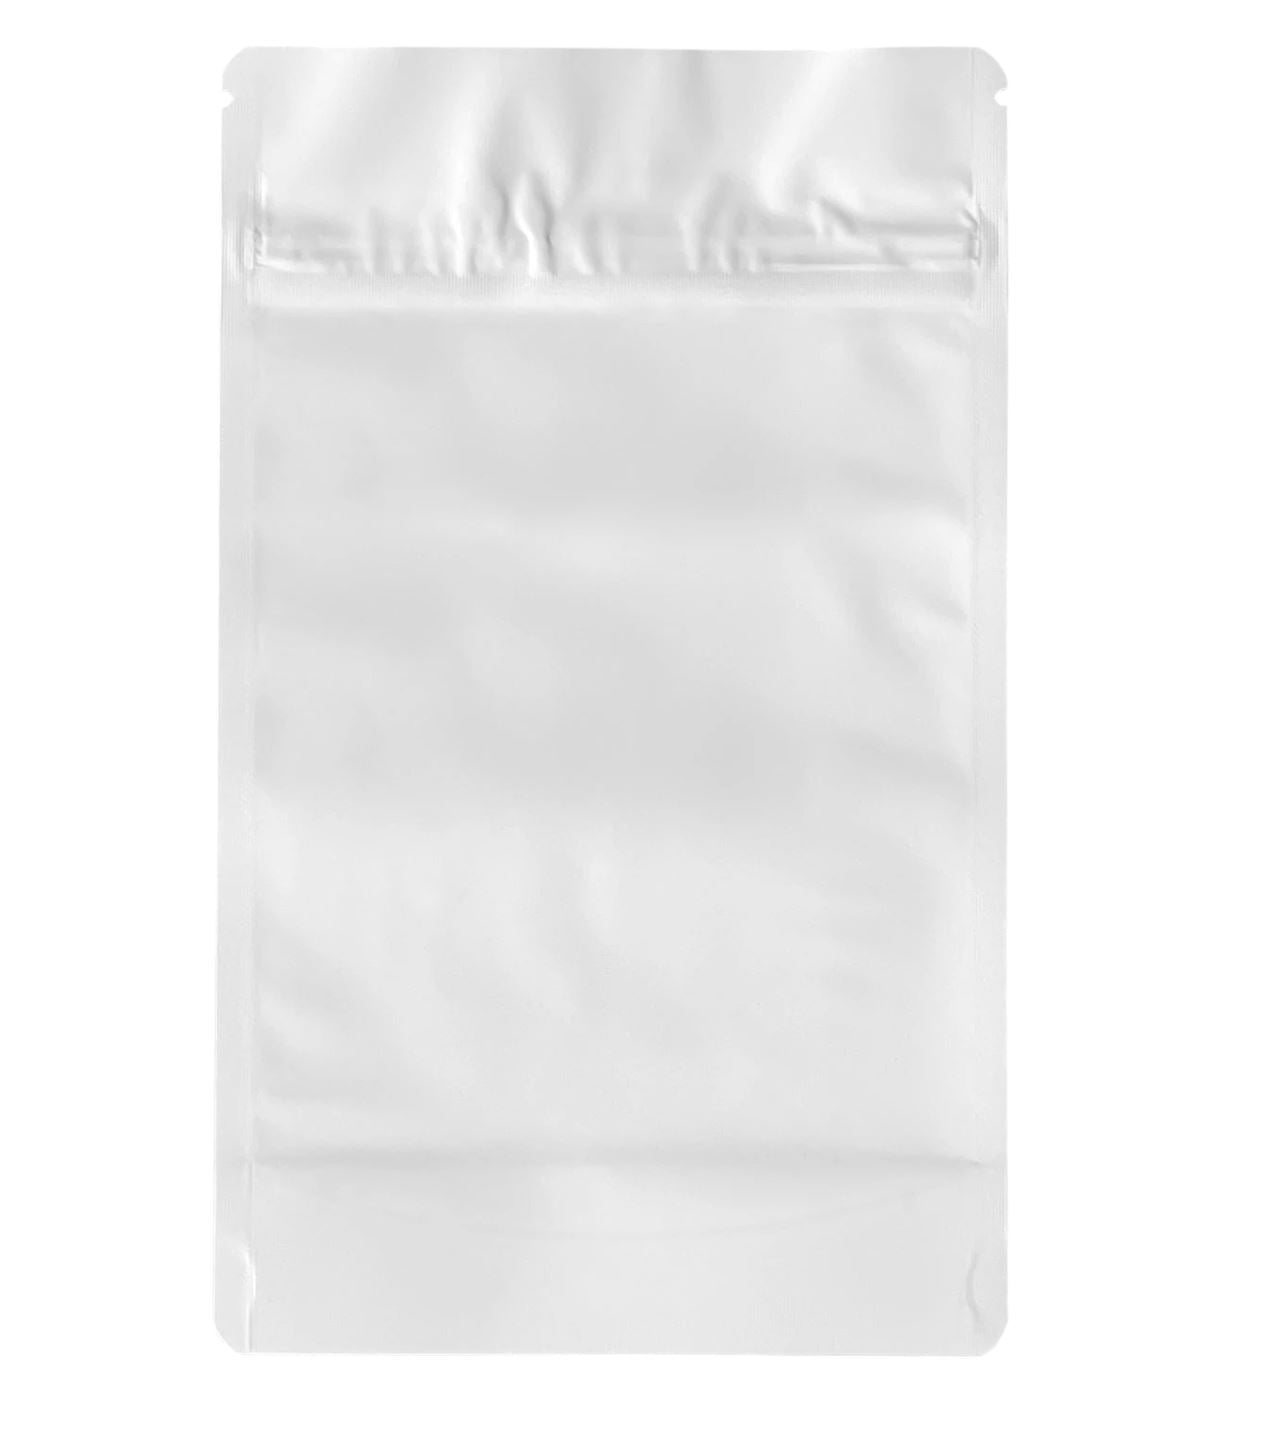 1/2 Ounce Child Resistant Bags All White 5"X8.15"+2.36" - 1,000 COUNT Flower Power Packages 